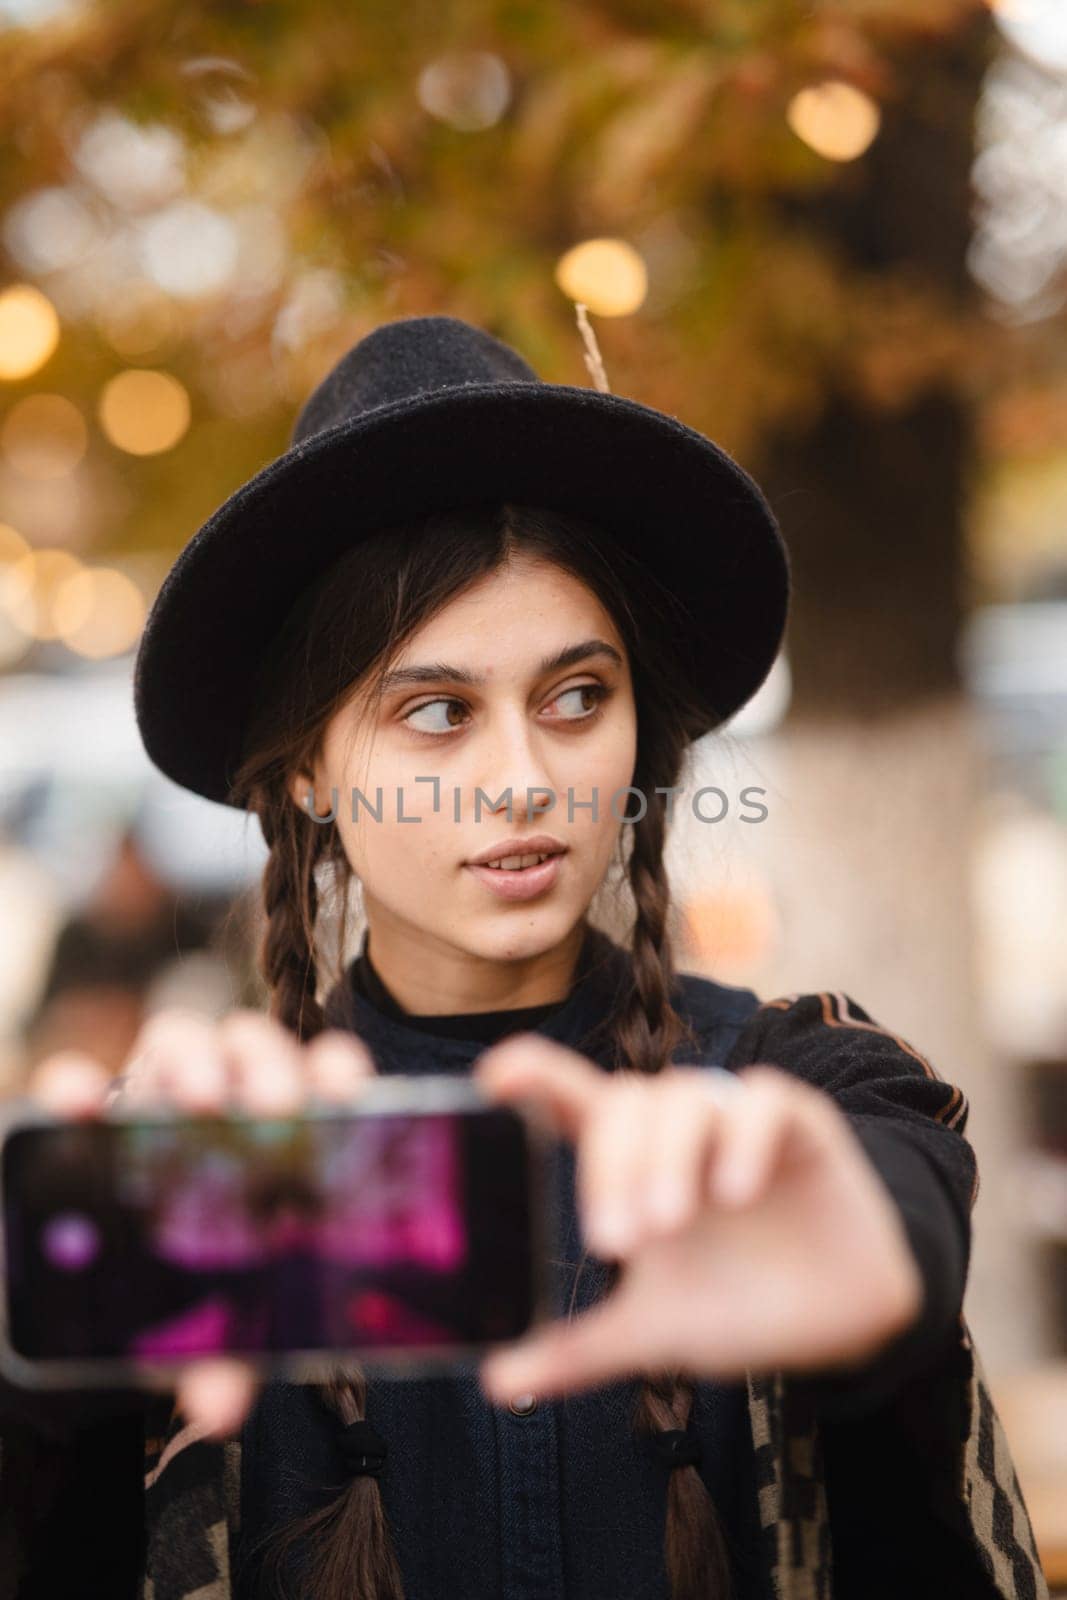 An elegant and stylish lady, accessorized with a black hat and a braided hairstyle. High quality photo